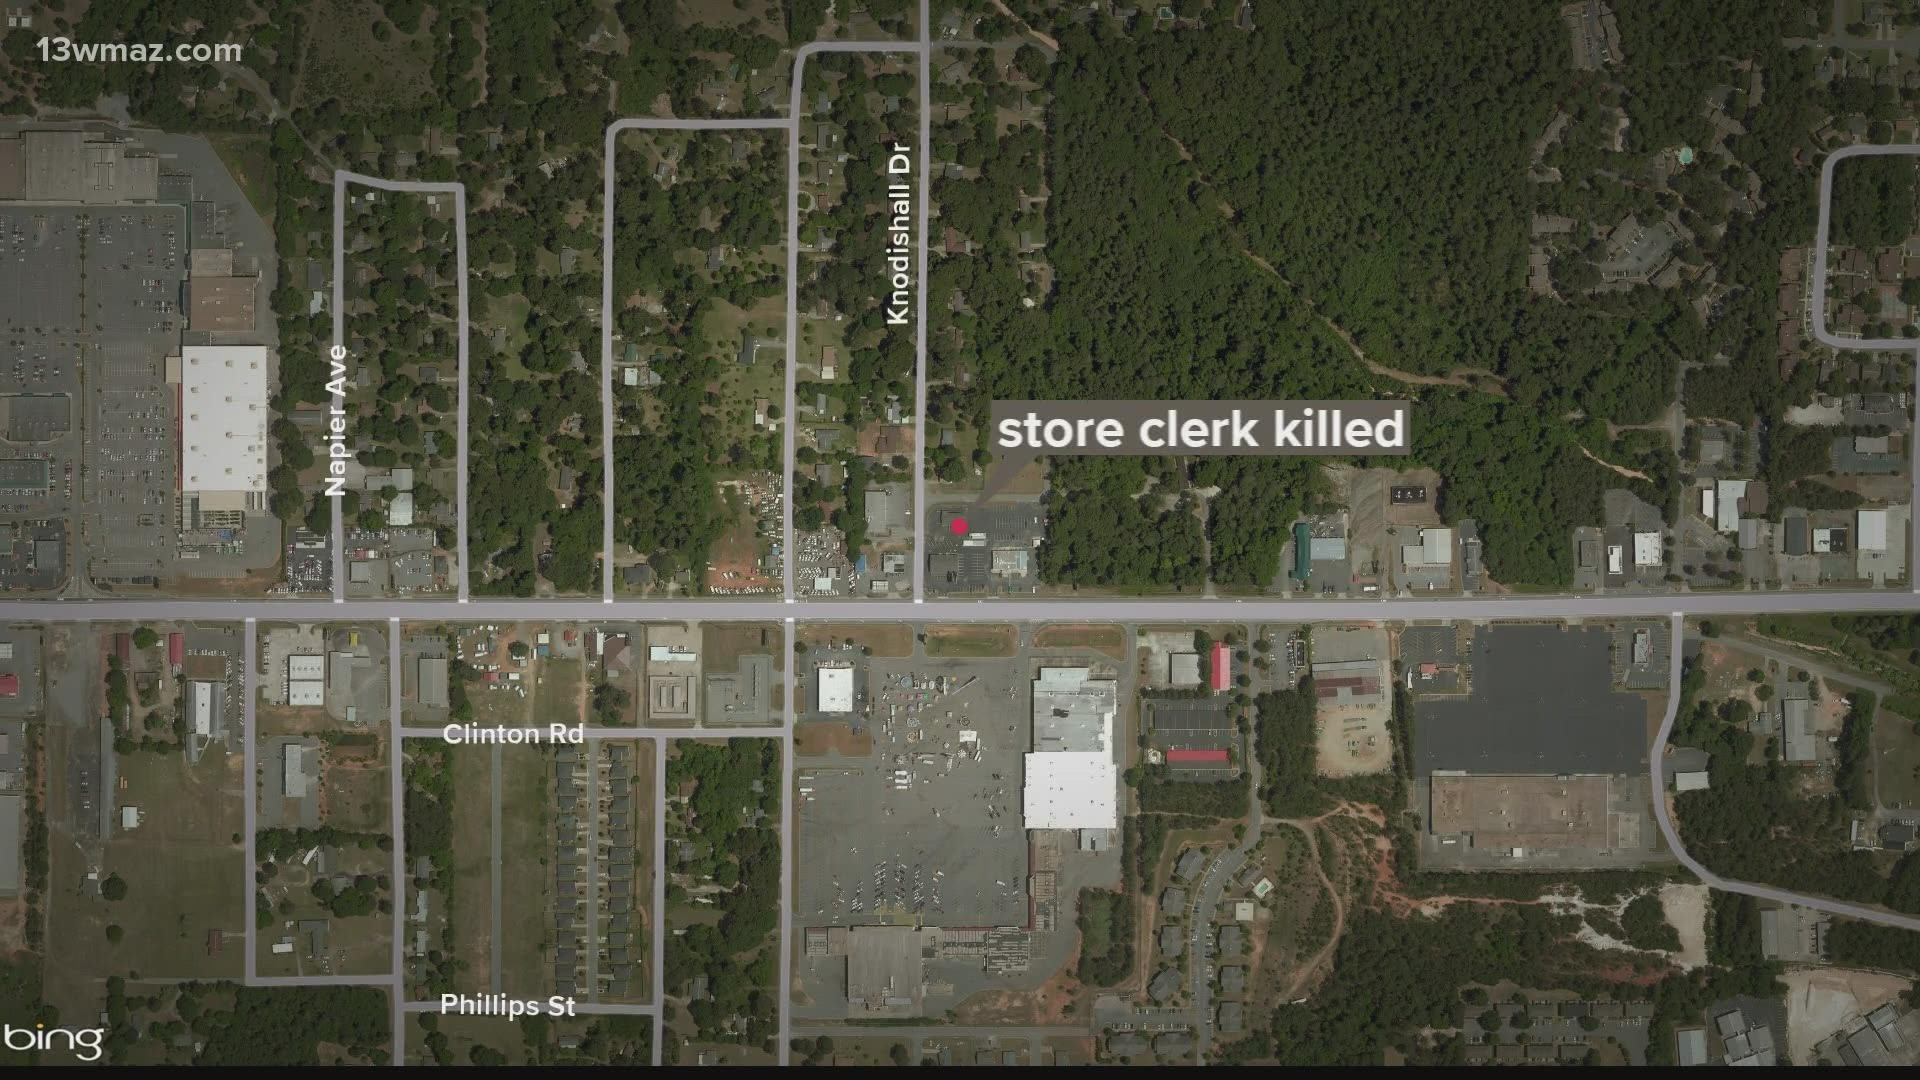 Houston County deputies are investigating after a group of men robbed a dollar store and killed the store clerk early Tuesday morning.